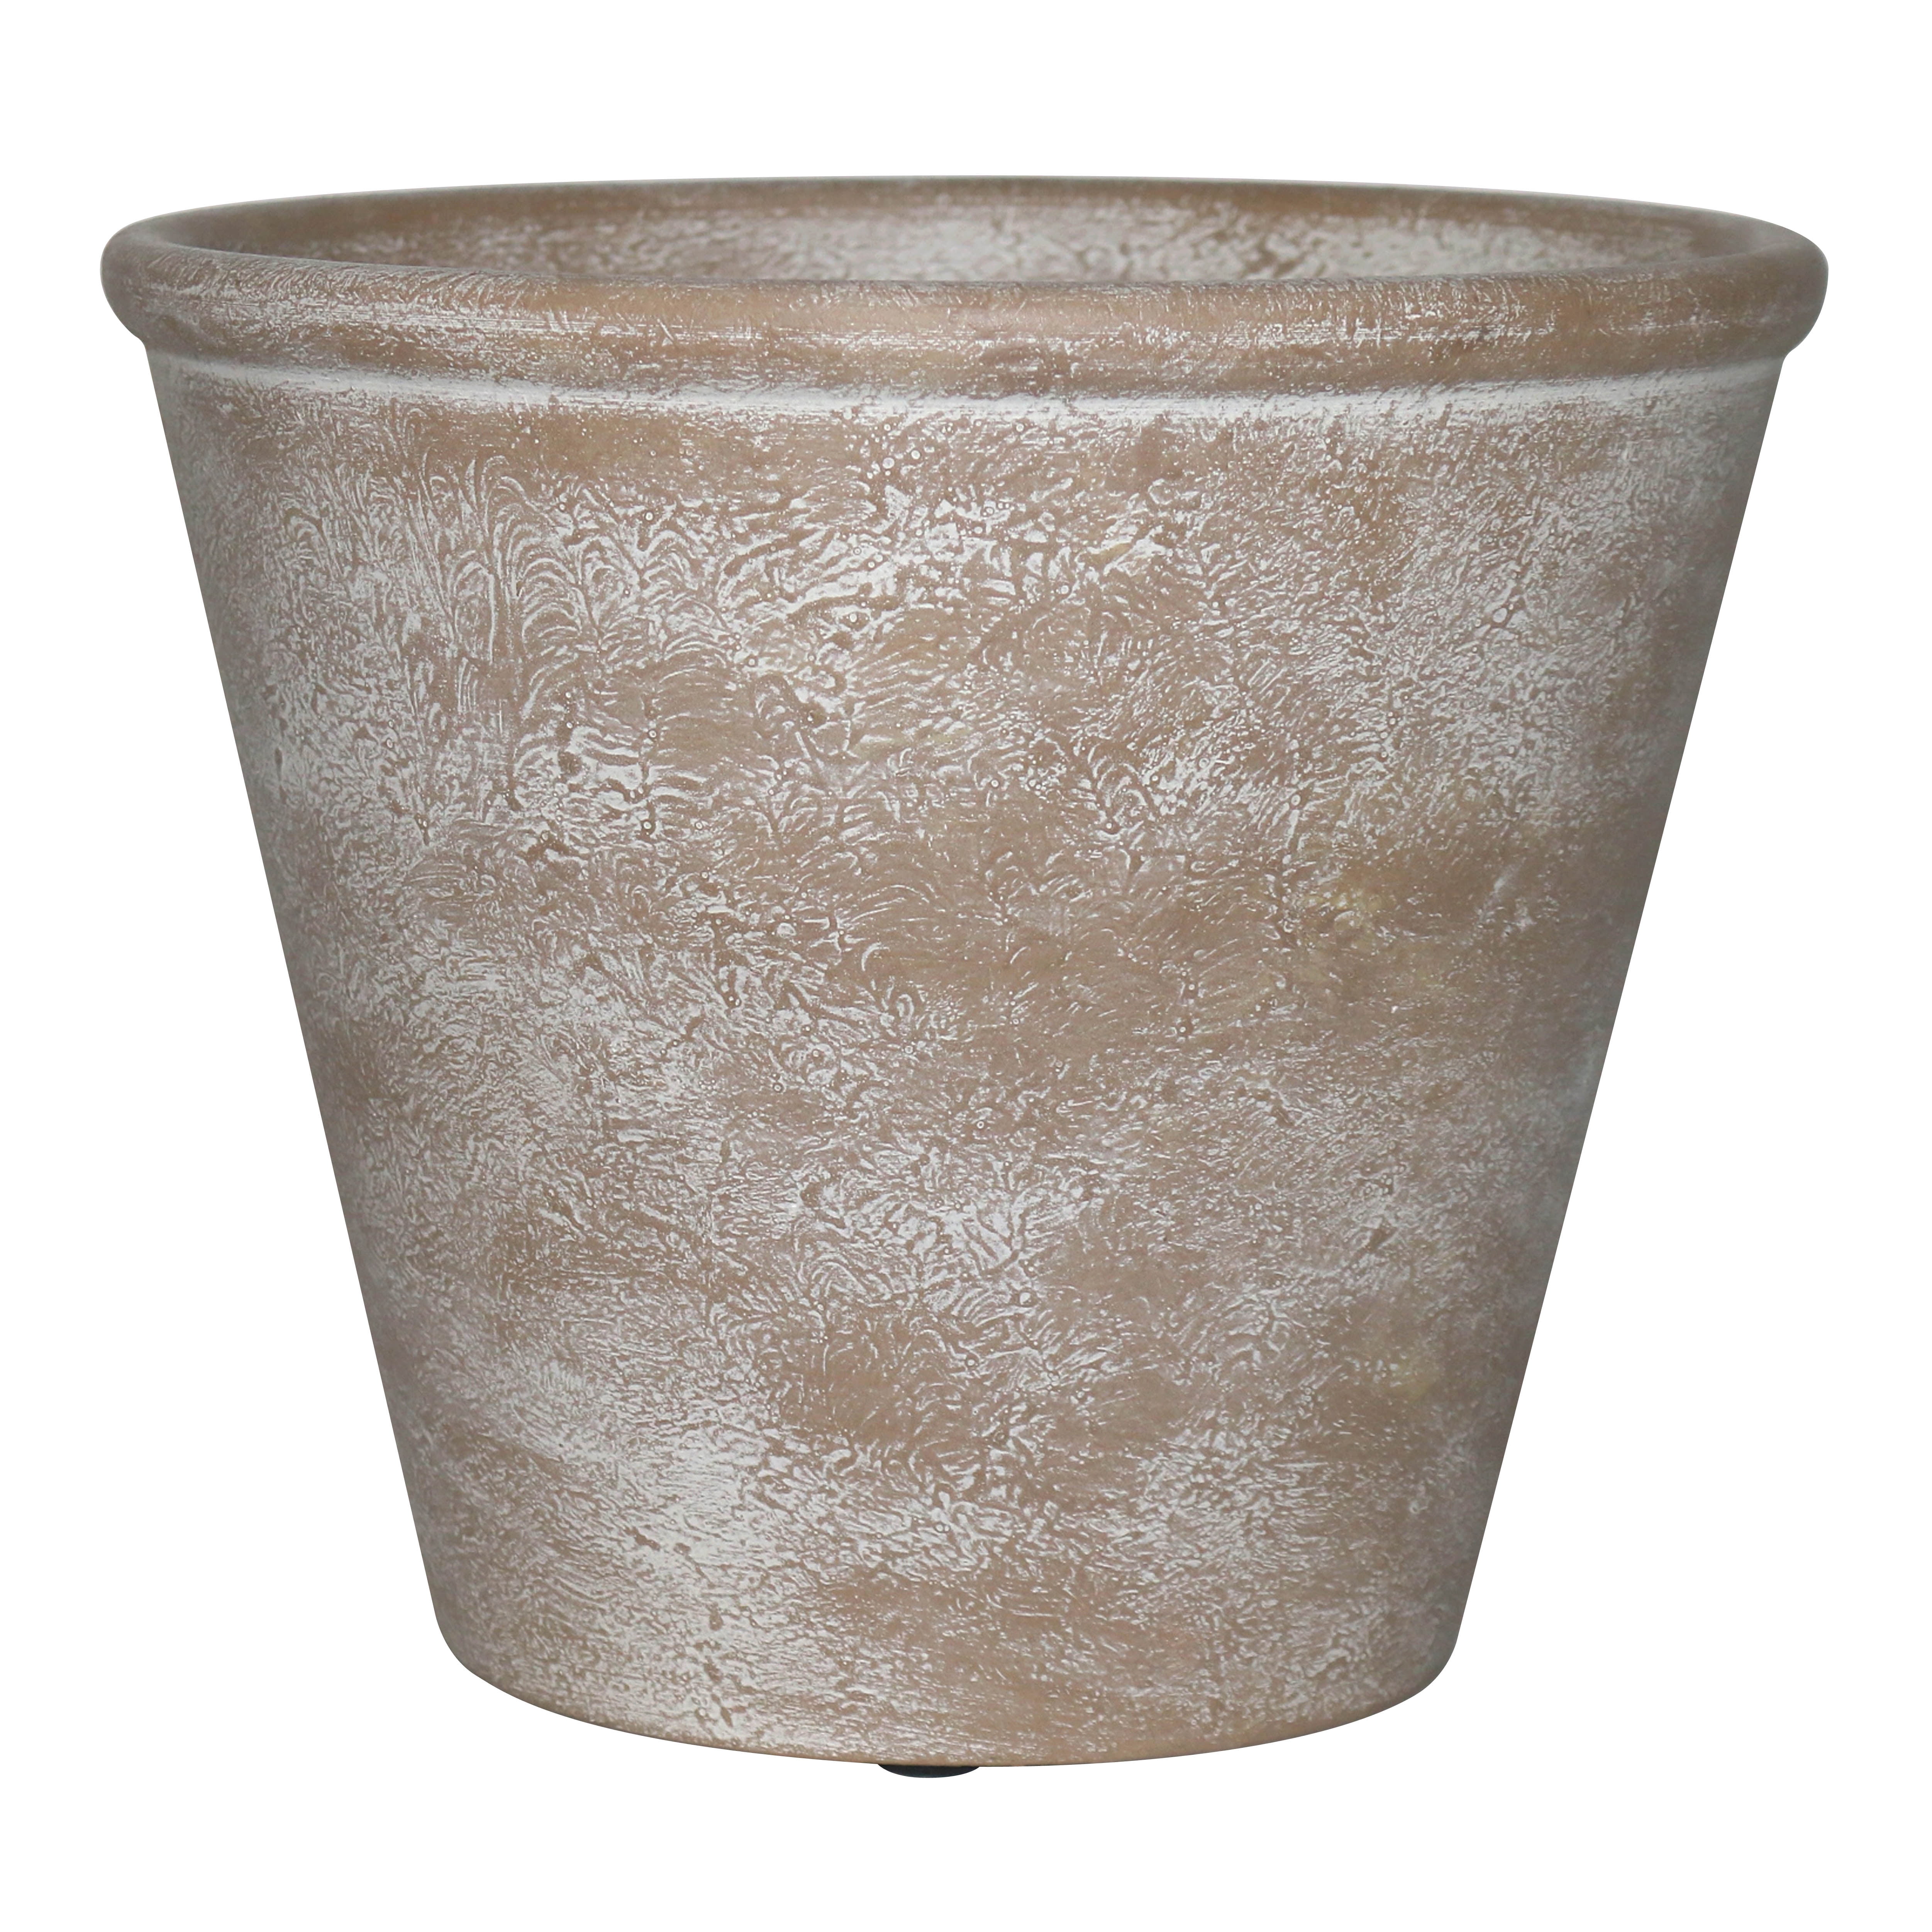 Trendy Hand-painted olive green 4.7 terracotta pot